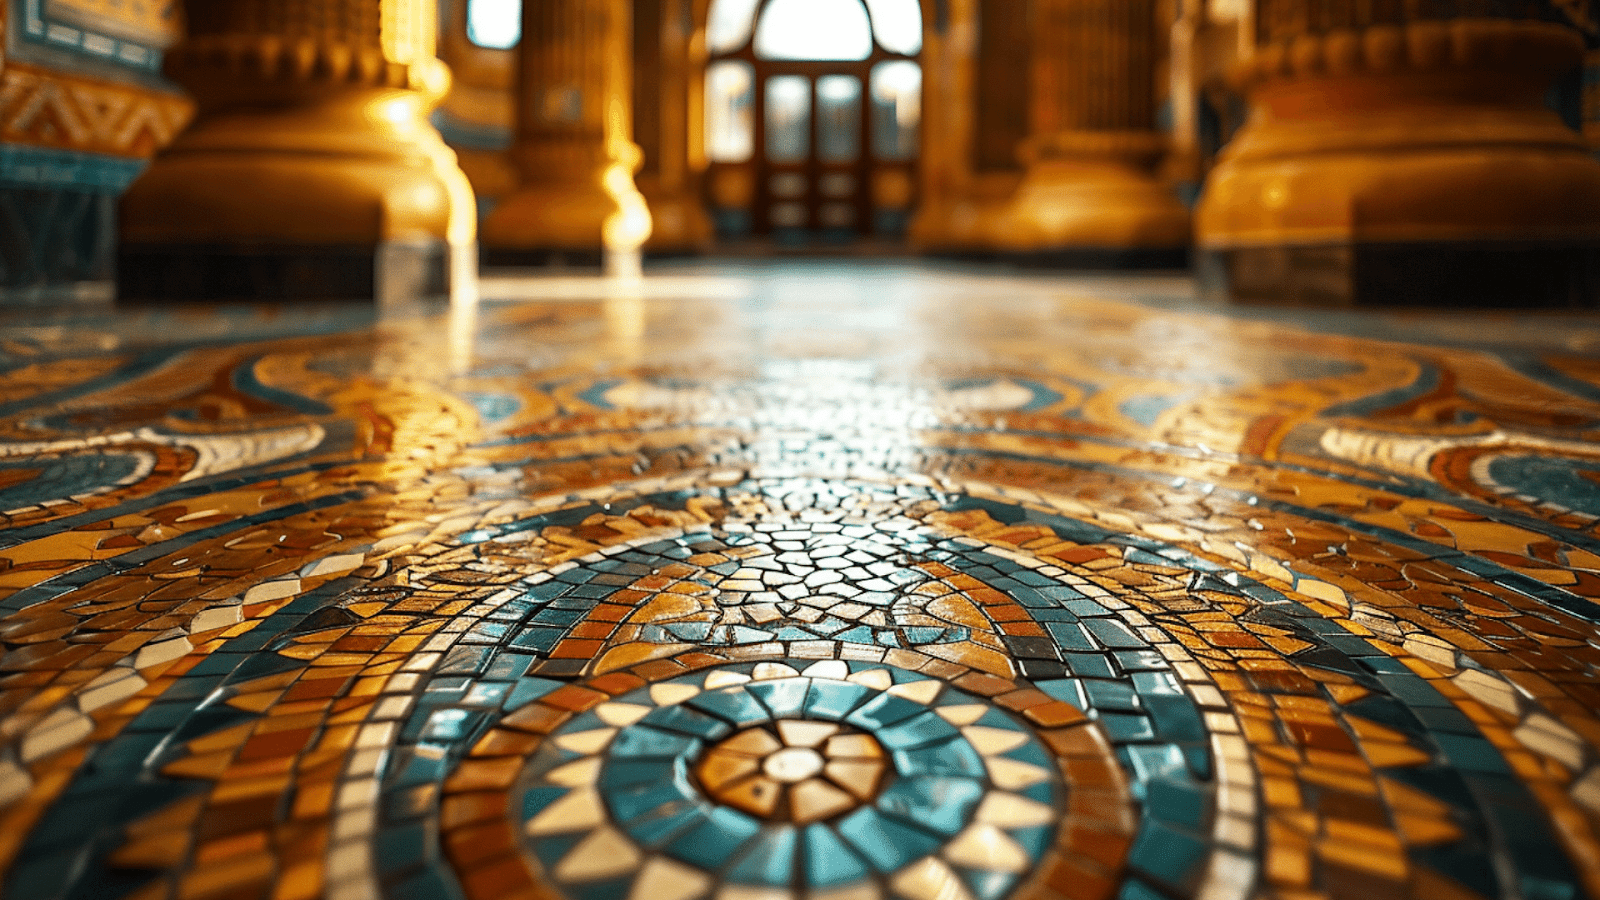 One of the things to know before you go to Budapest is that its thermal baths boast intricate mosaic tiles